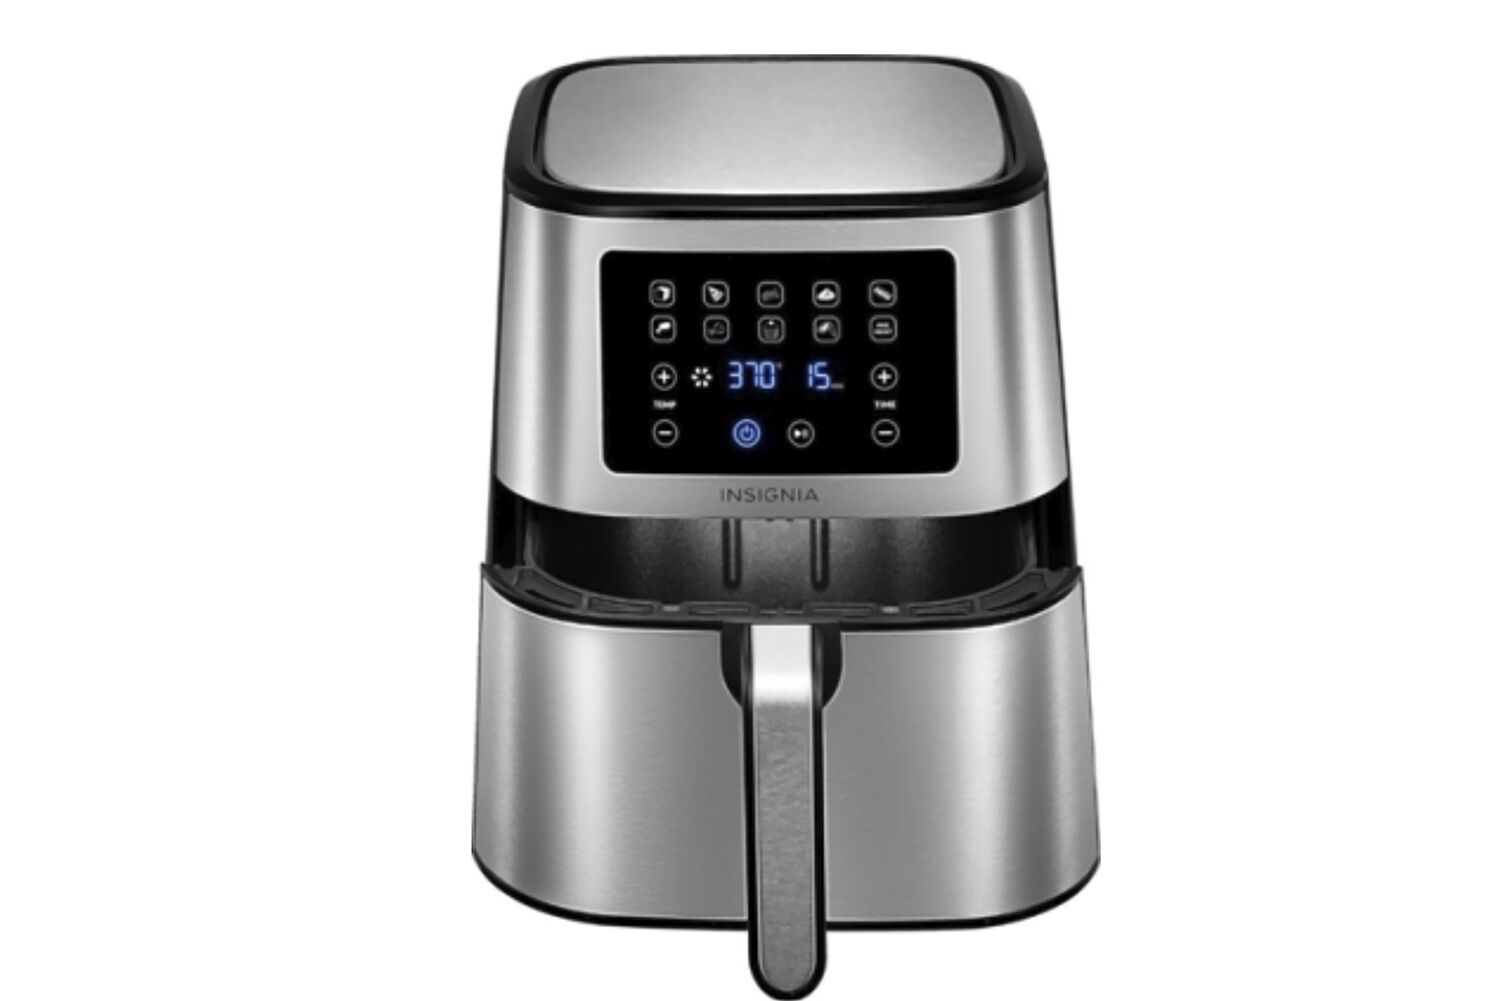 <p>This image provided by Consumer Product Safety Commission shows an Insignia Air Fryer. On Friday, March 15, 2024, Best Buy is recalling more than 287,000 air fryers and air fryer ovens due to an overheating issue that can cause the products’ parts to melt or shatter, posing fire and laceration risks. According to the U.S. Consumer Product Safety Commission, the Insignia-branded air fryer ovens can overheat — and their glass doors can shatter as a result. The air fryers’ handles can also melt or break when overheated. (Consumer Product Safety Commission via AP)</p>   PHOTO CREDIT: Uncredited - handout one time use, ASSOCIATED PRESS